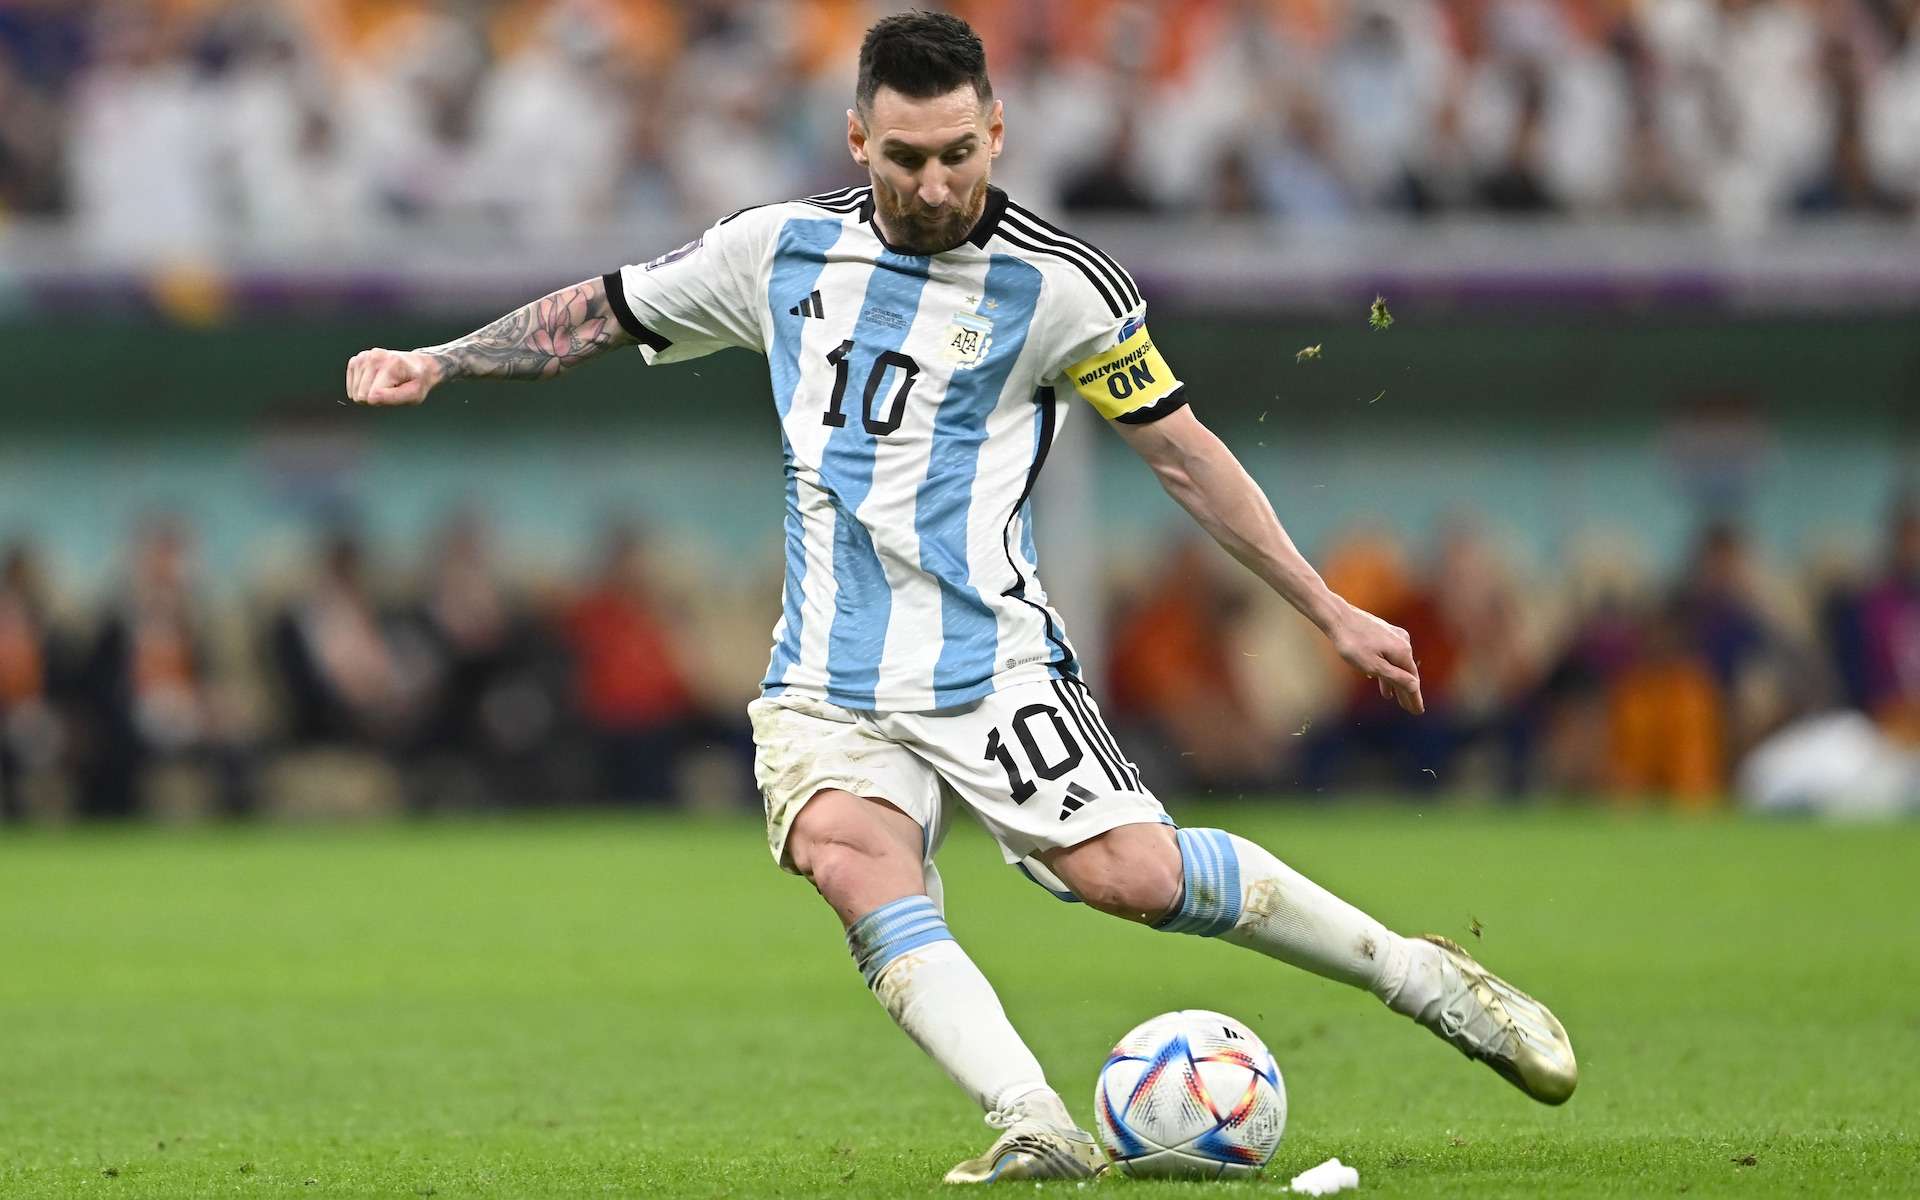 Lionel Messi seeks to surpass his own World Cup accomplishments